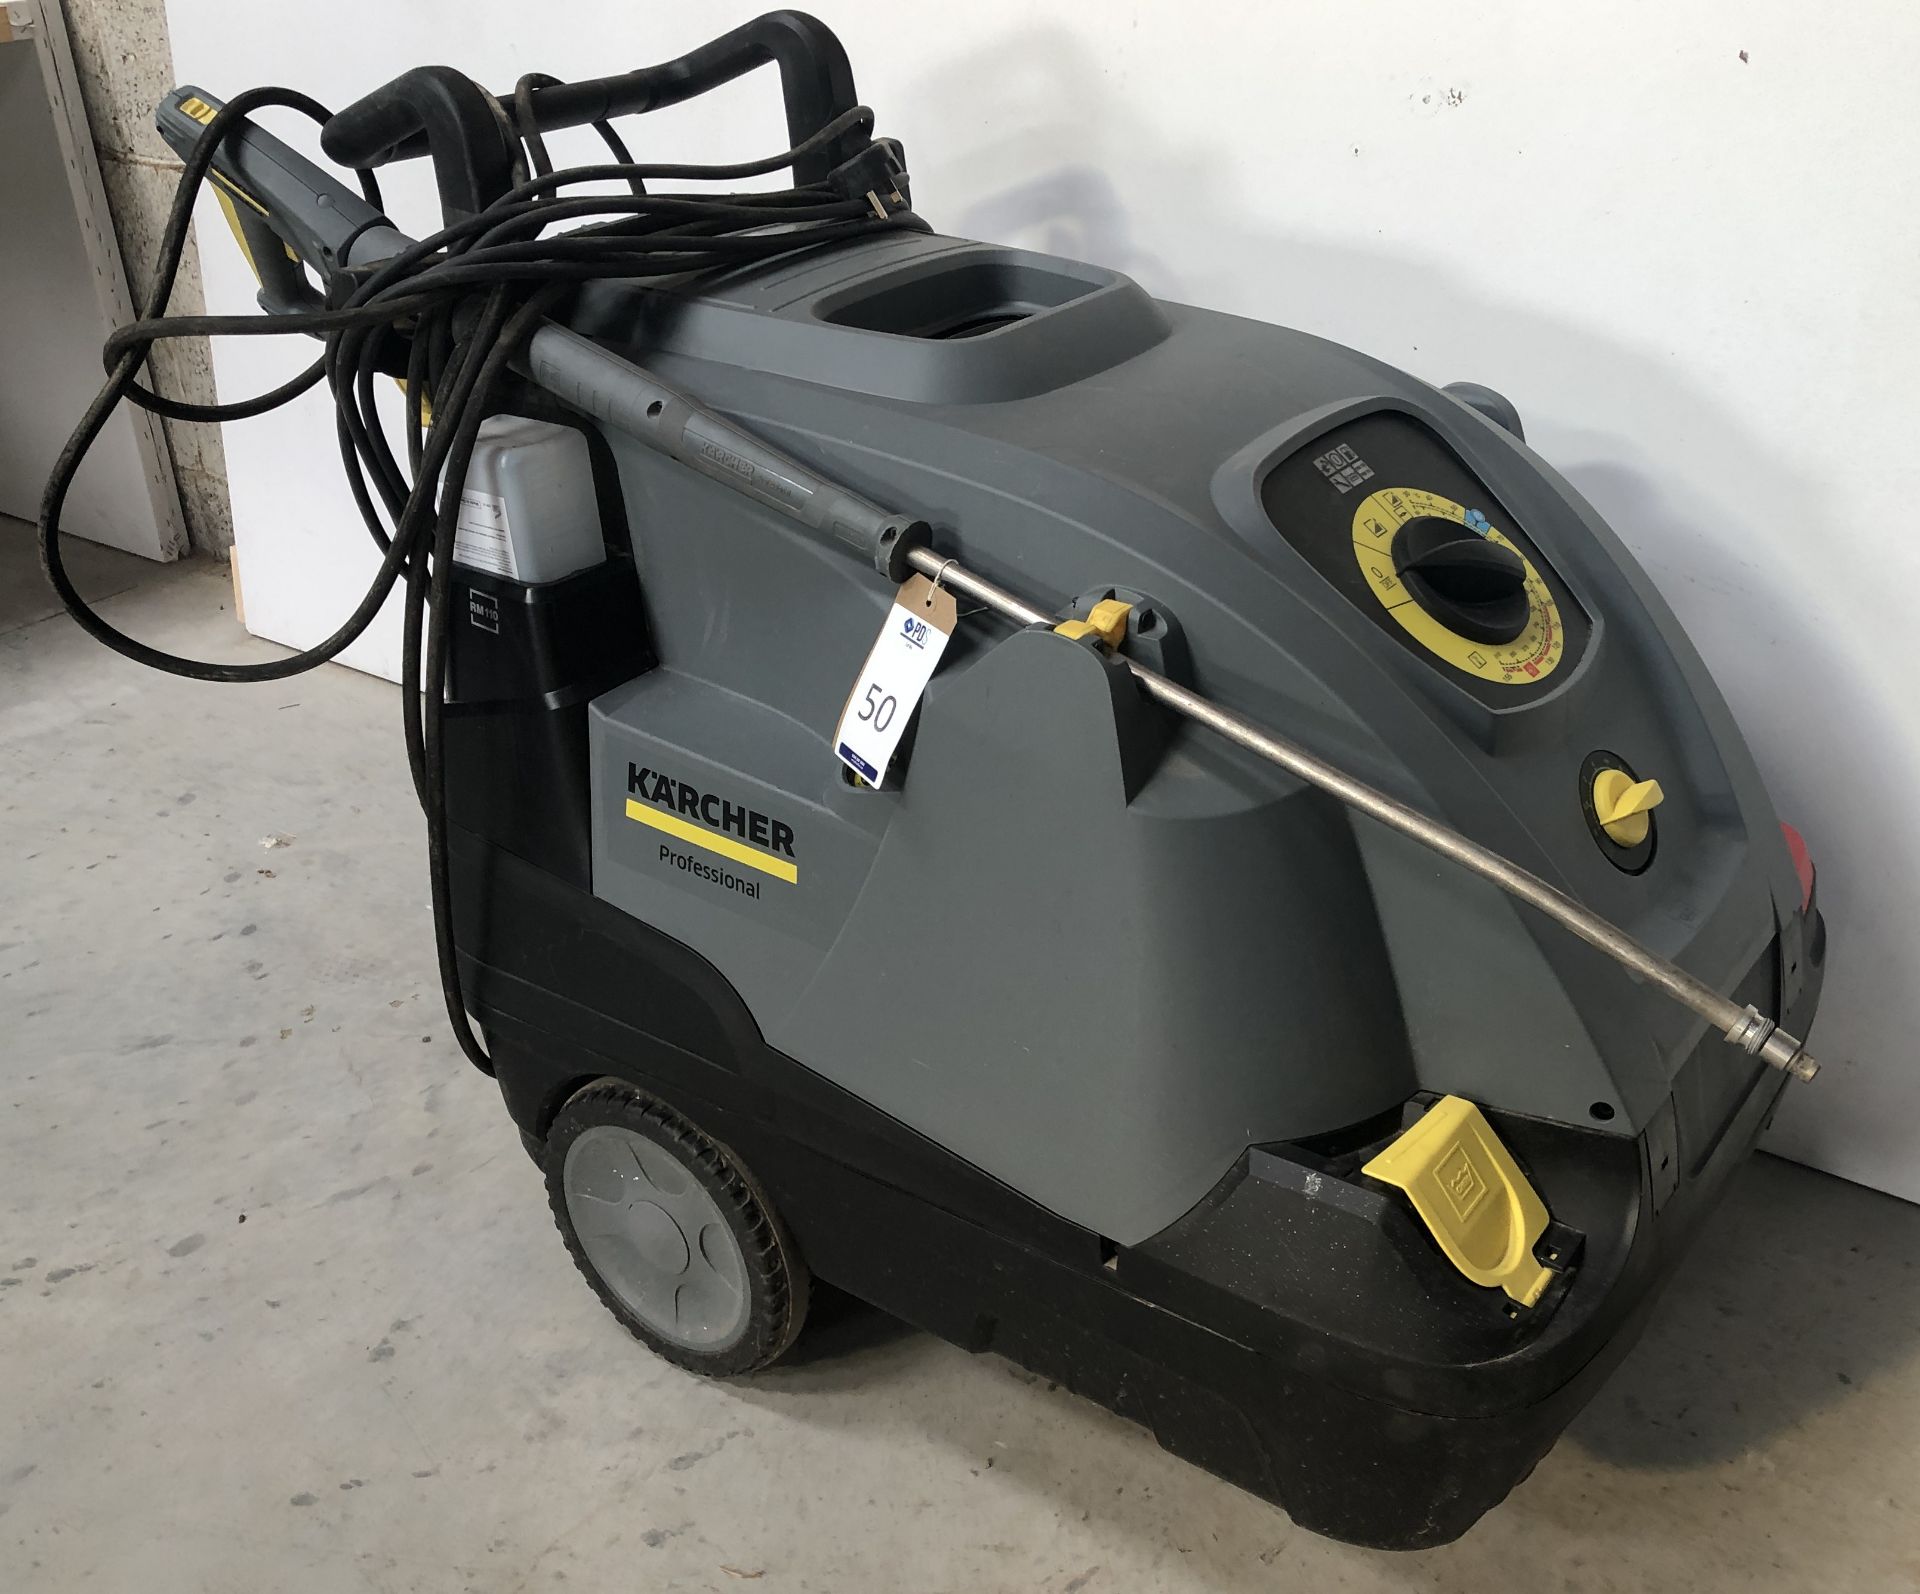 Karcher “Professional” HDS6/12 C Hot Water Pressure Washer (2018), Serial Number 02159080190 ( - Image 2 of 4